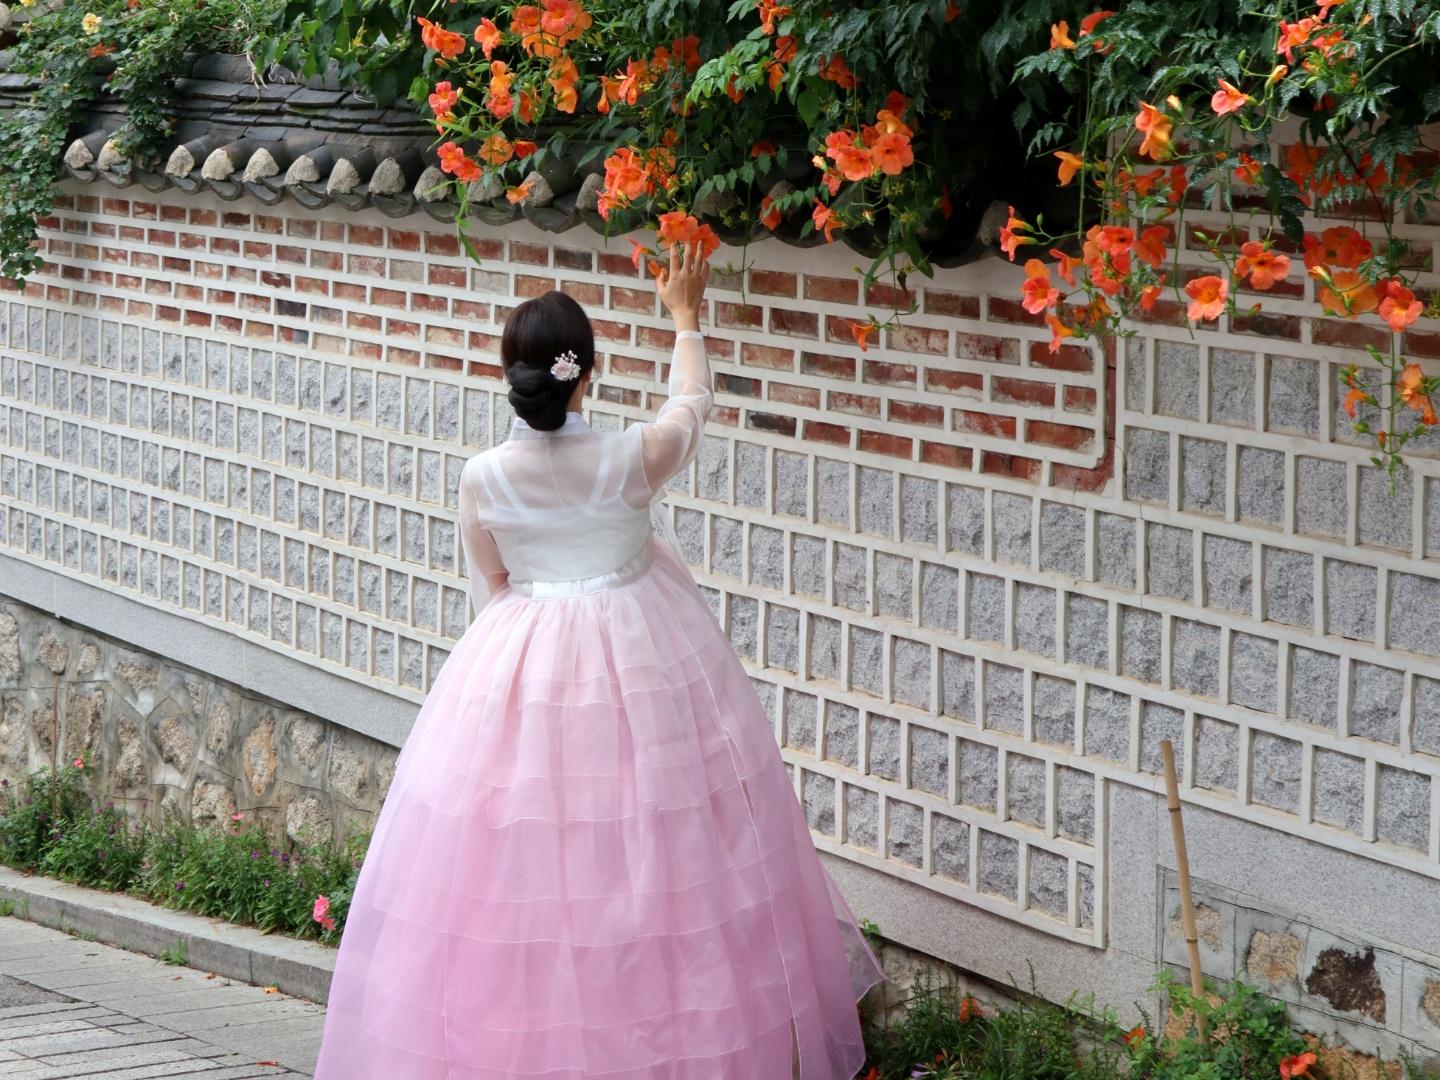 Happy woman in pink hanbok dress stands in front of Gyeongbokgung temple with beautiful plant and petal decorations.